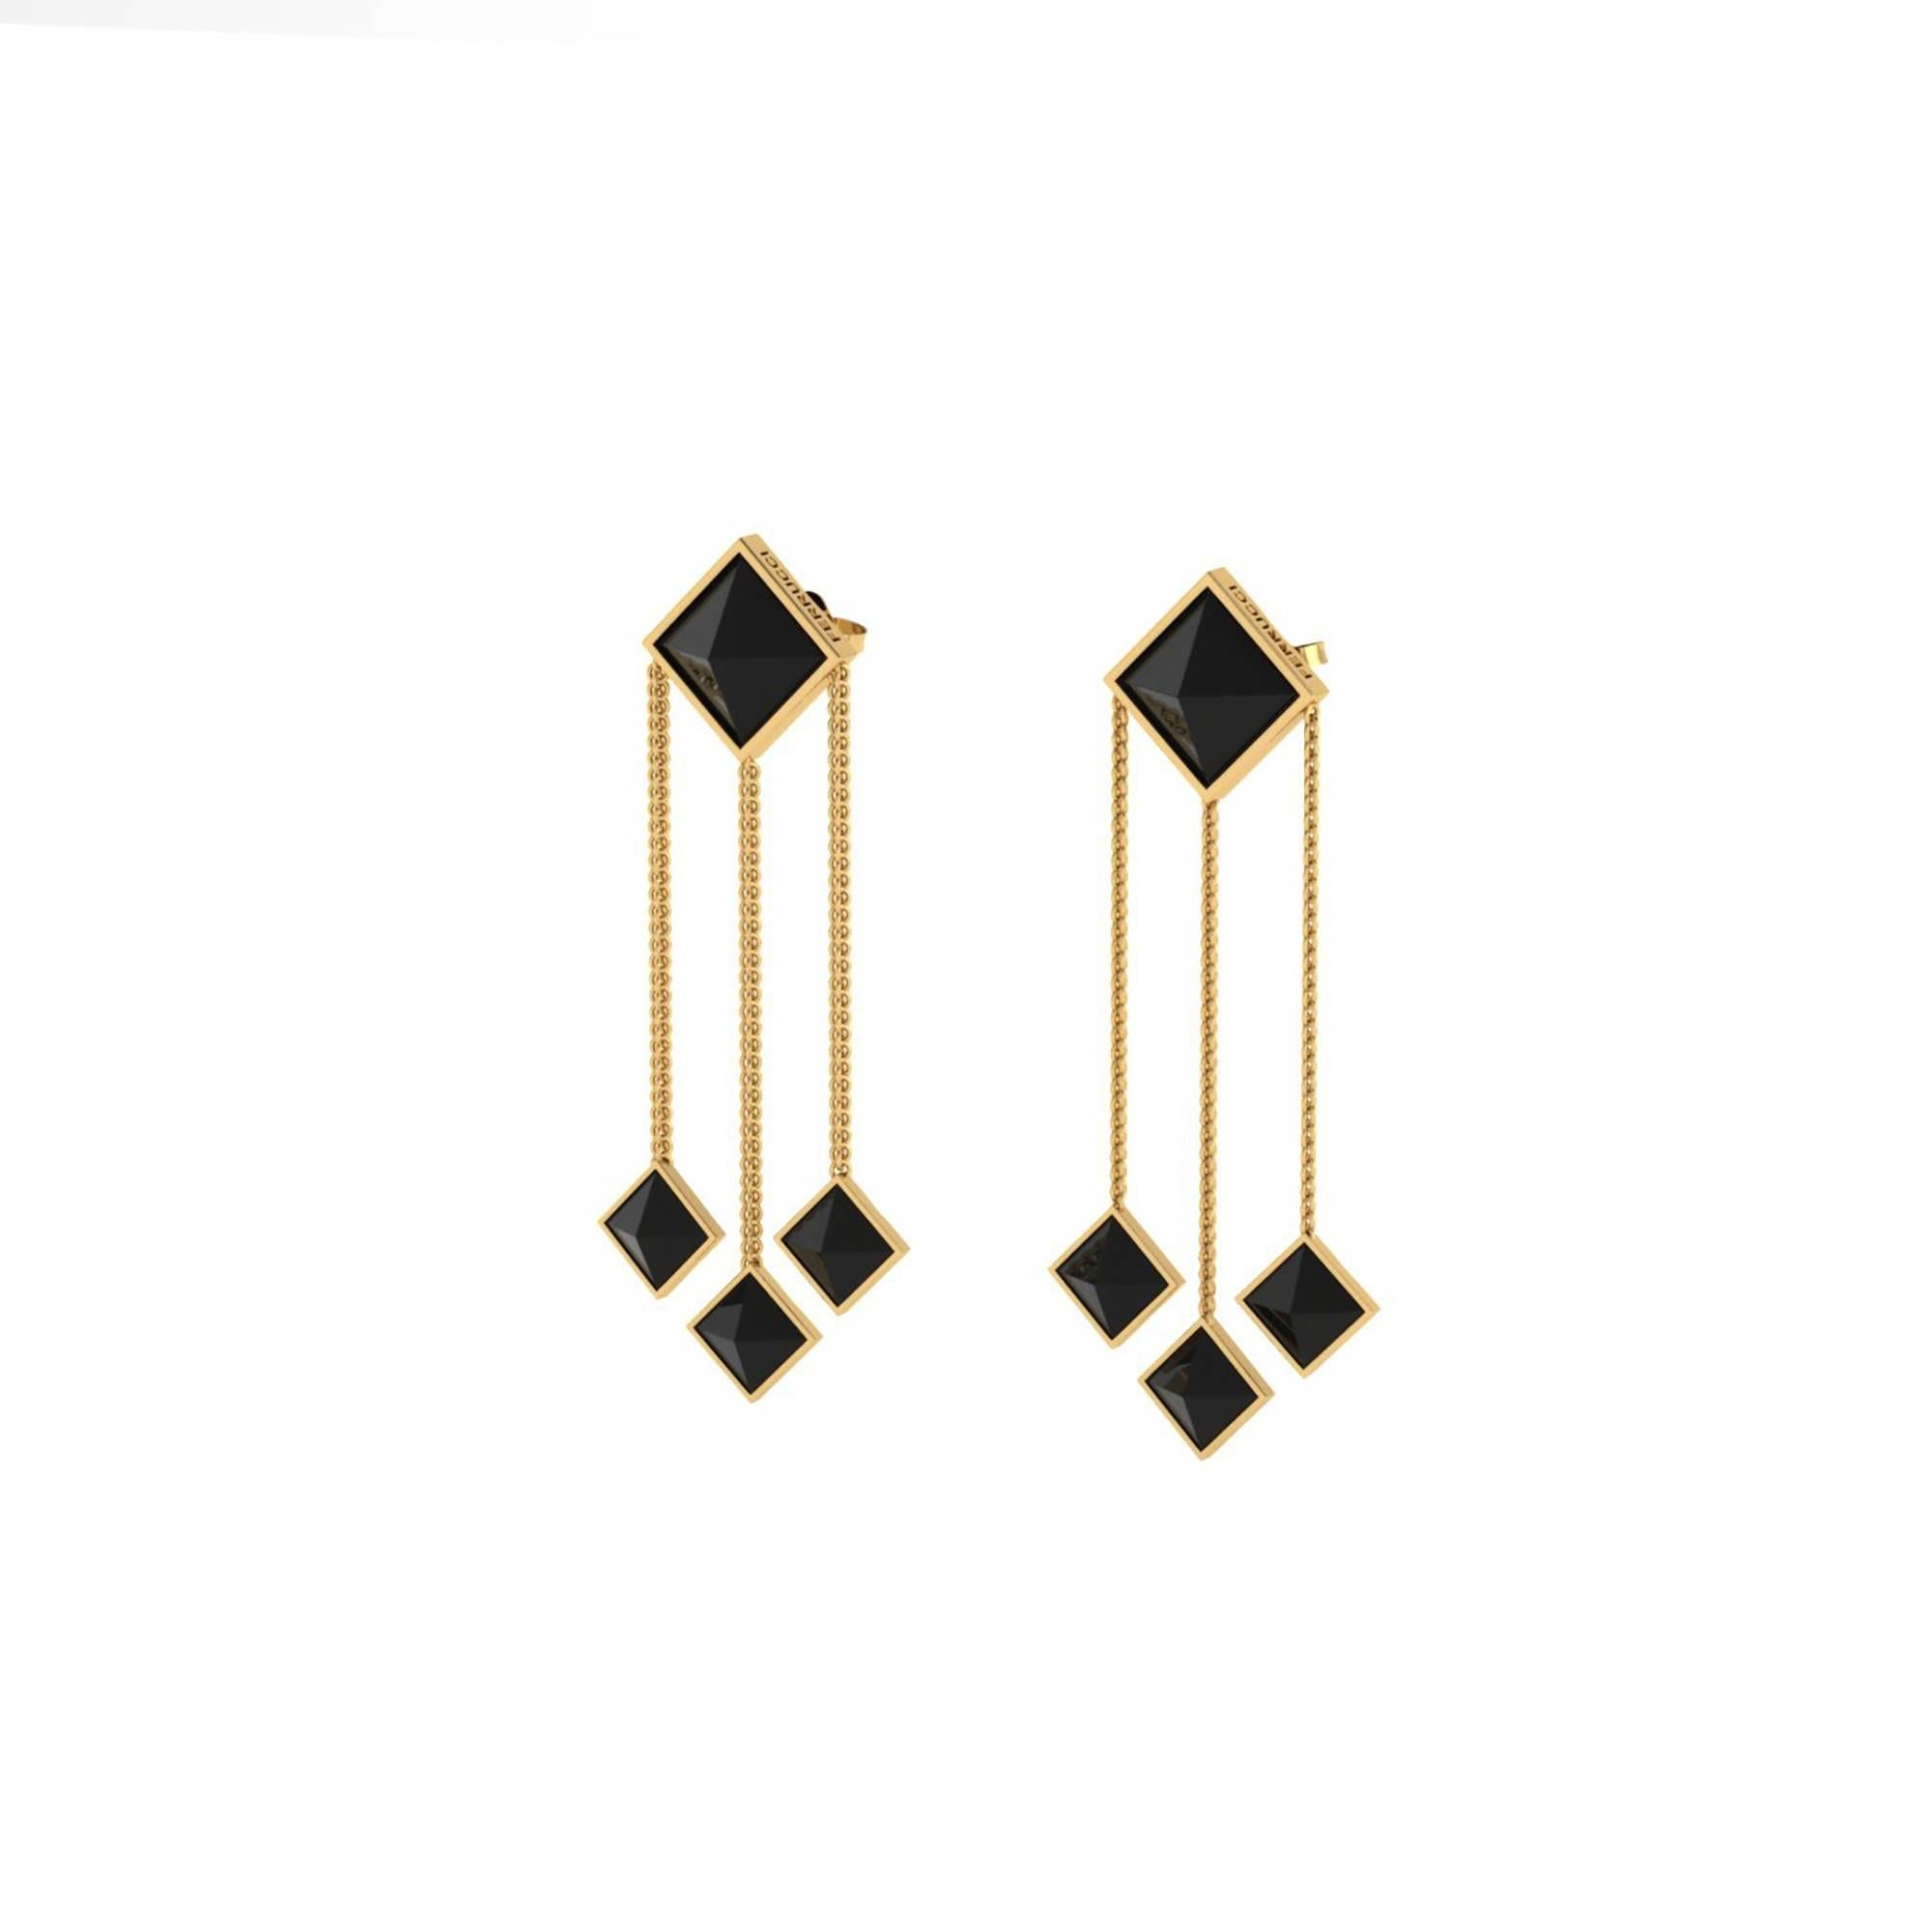 From FERRUCCI Pyramids collection, these Black Onyx Pyramid cut, set in 18k yellow gold dangling earrings, hand made in New York city by Italian master jeweler Francesco Ferrucci, an Art Deco inspire design, elegant but light for every occasion,